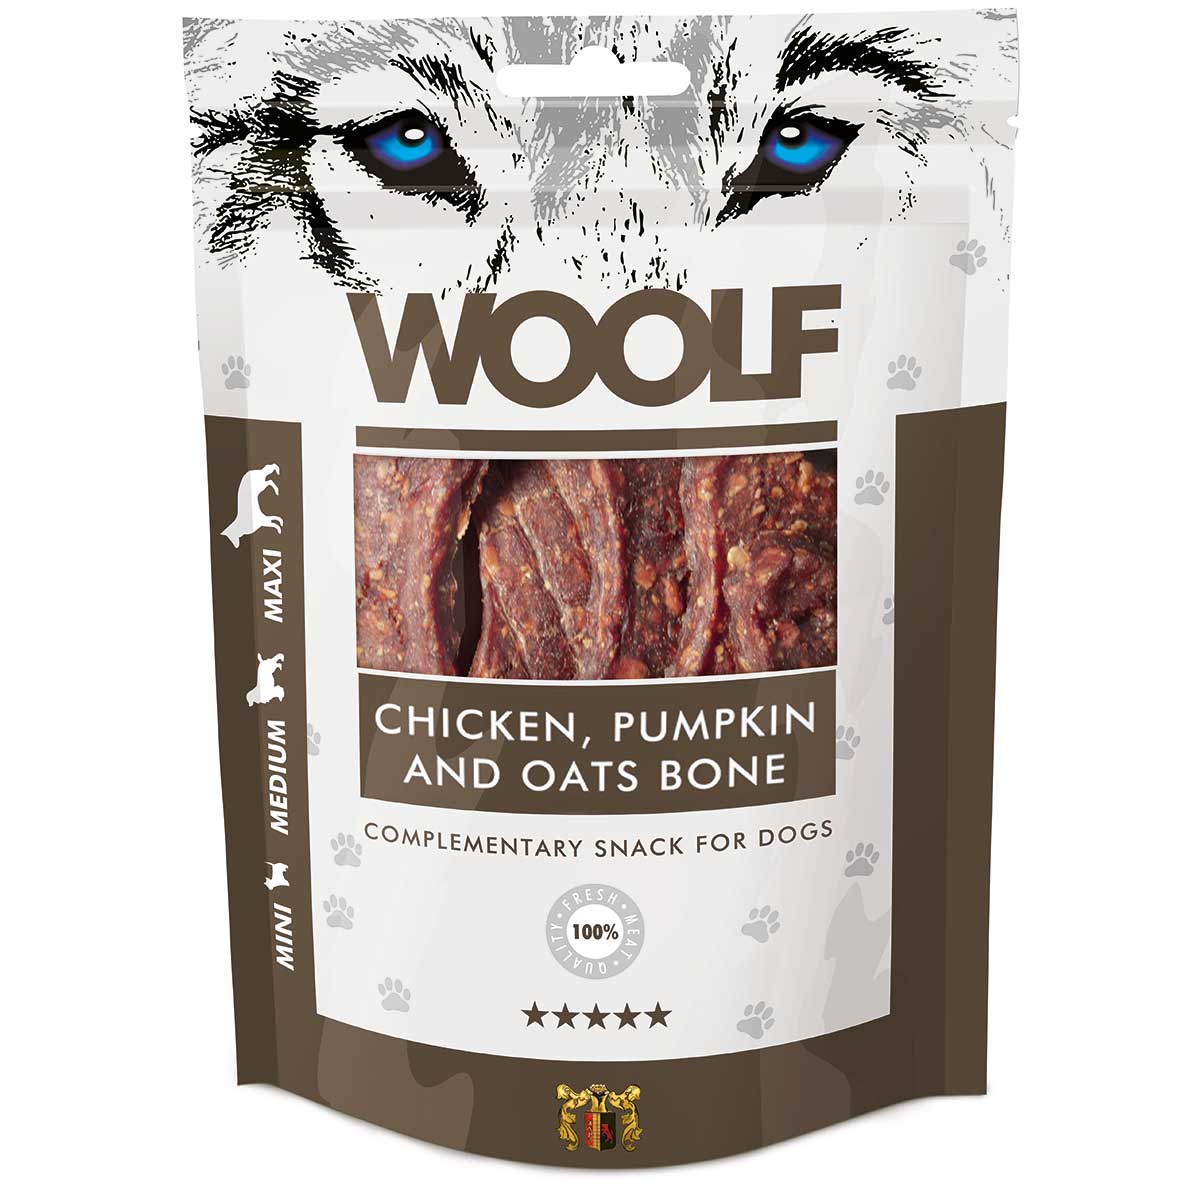 Woolf Dog treats large bones with chicken, pumpkin and oats